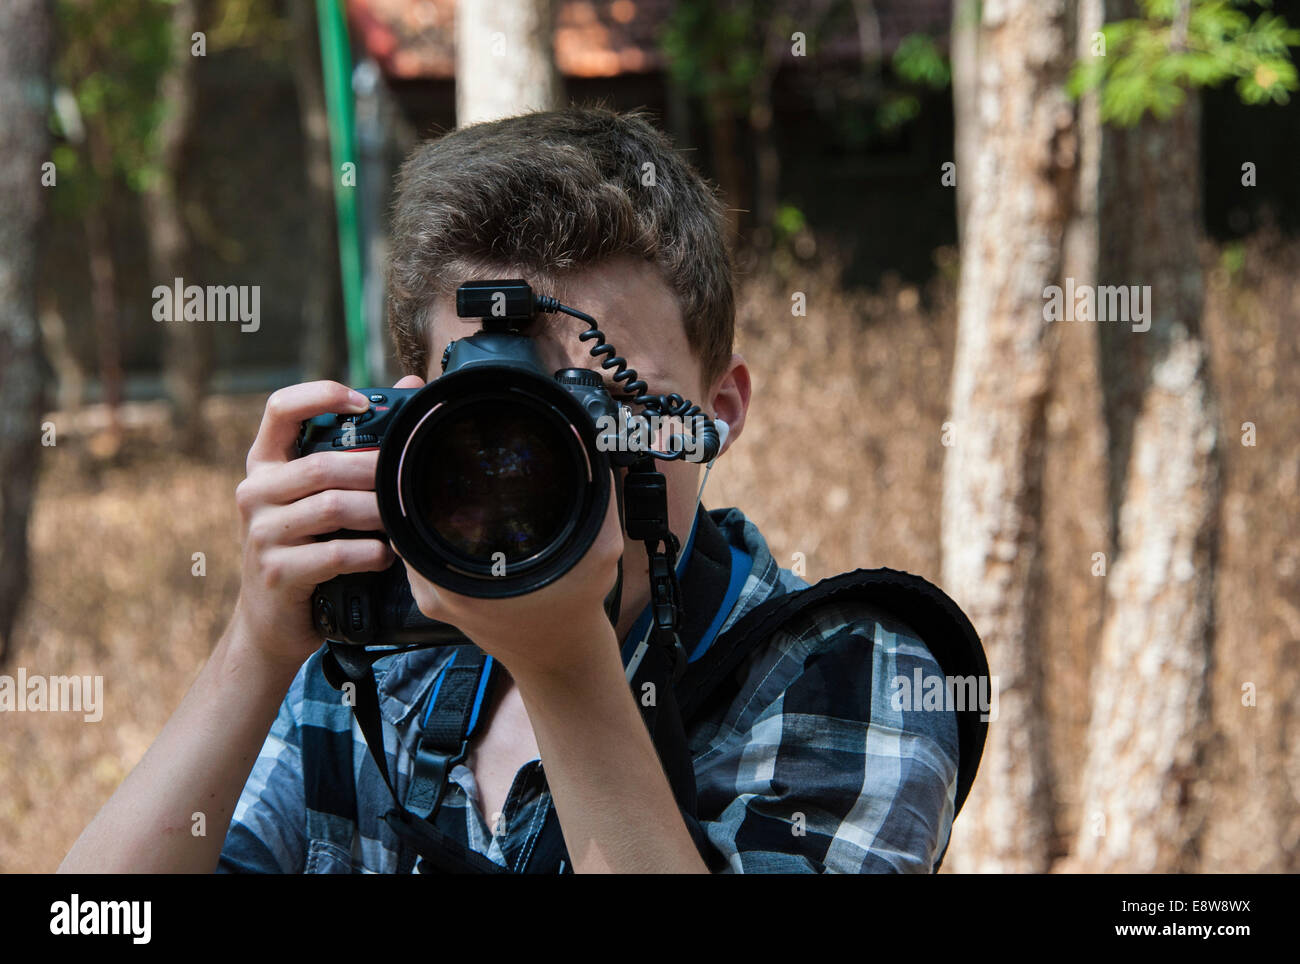 Teenager taking a photo with a professional camera Stock Photo